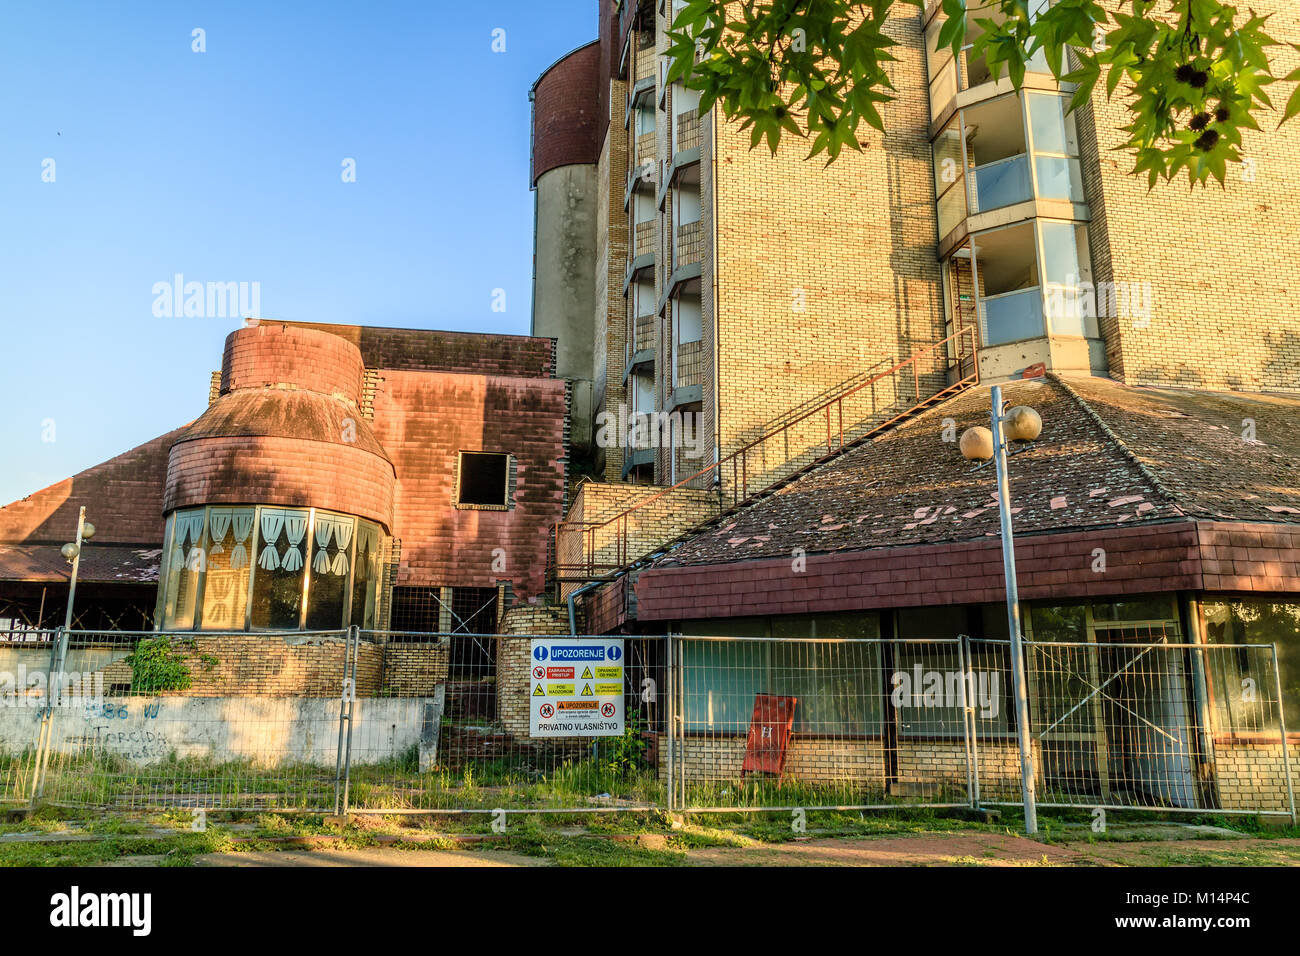 Hotel Dunav fenced off from the public with battle scars from the Croatian War of Independence. Vukovar, Croatia Stock Photo